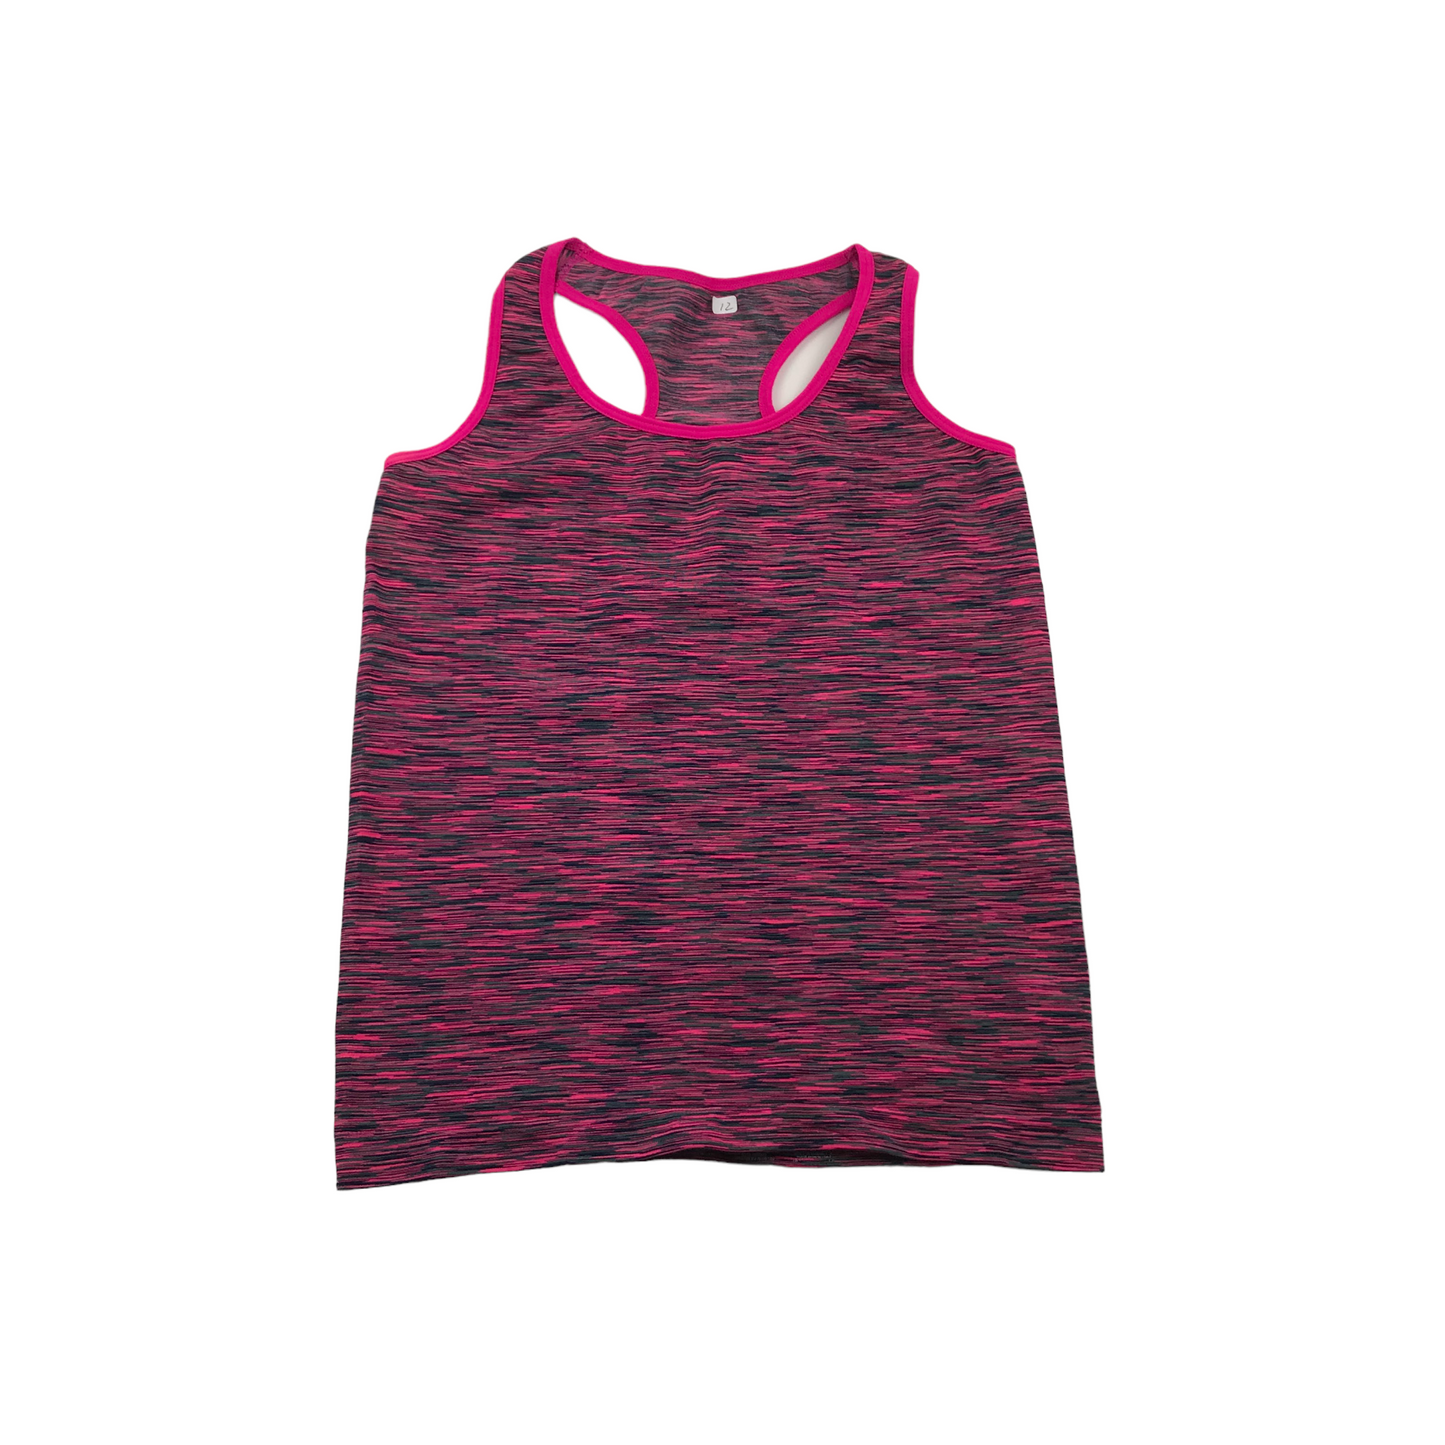 Purple and Grey Thermal Tank Top Set Age 11-12